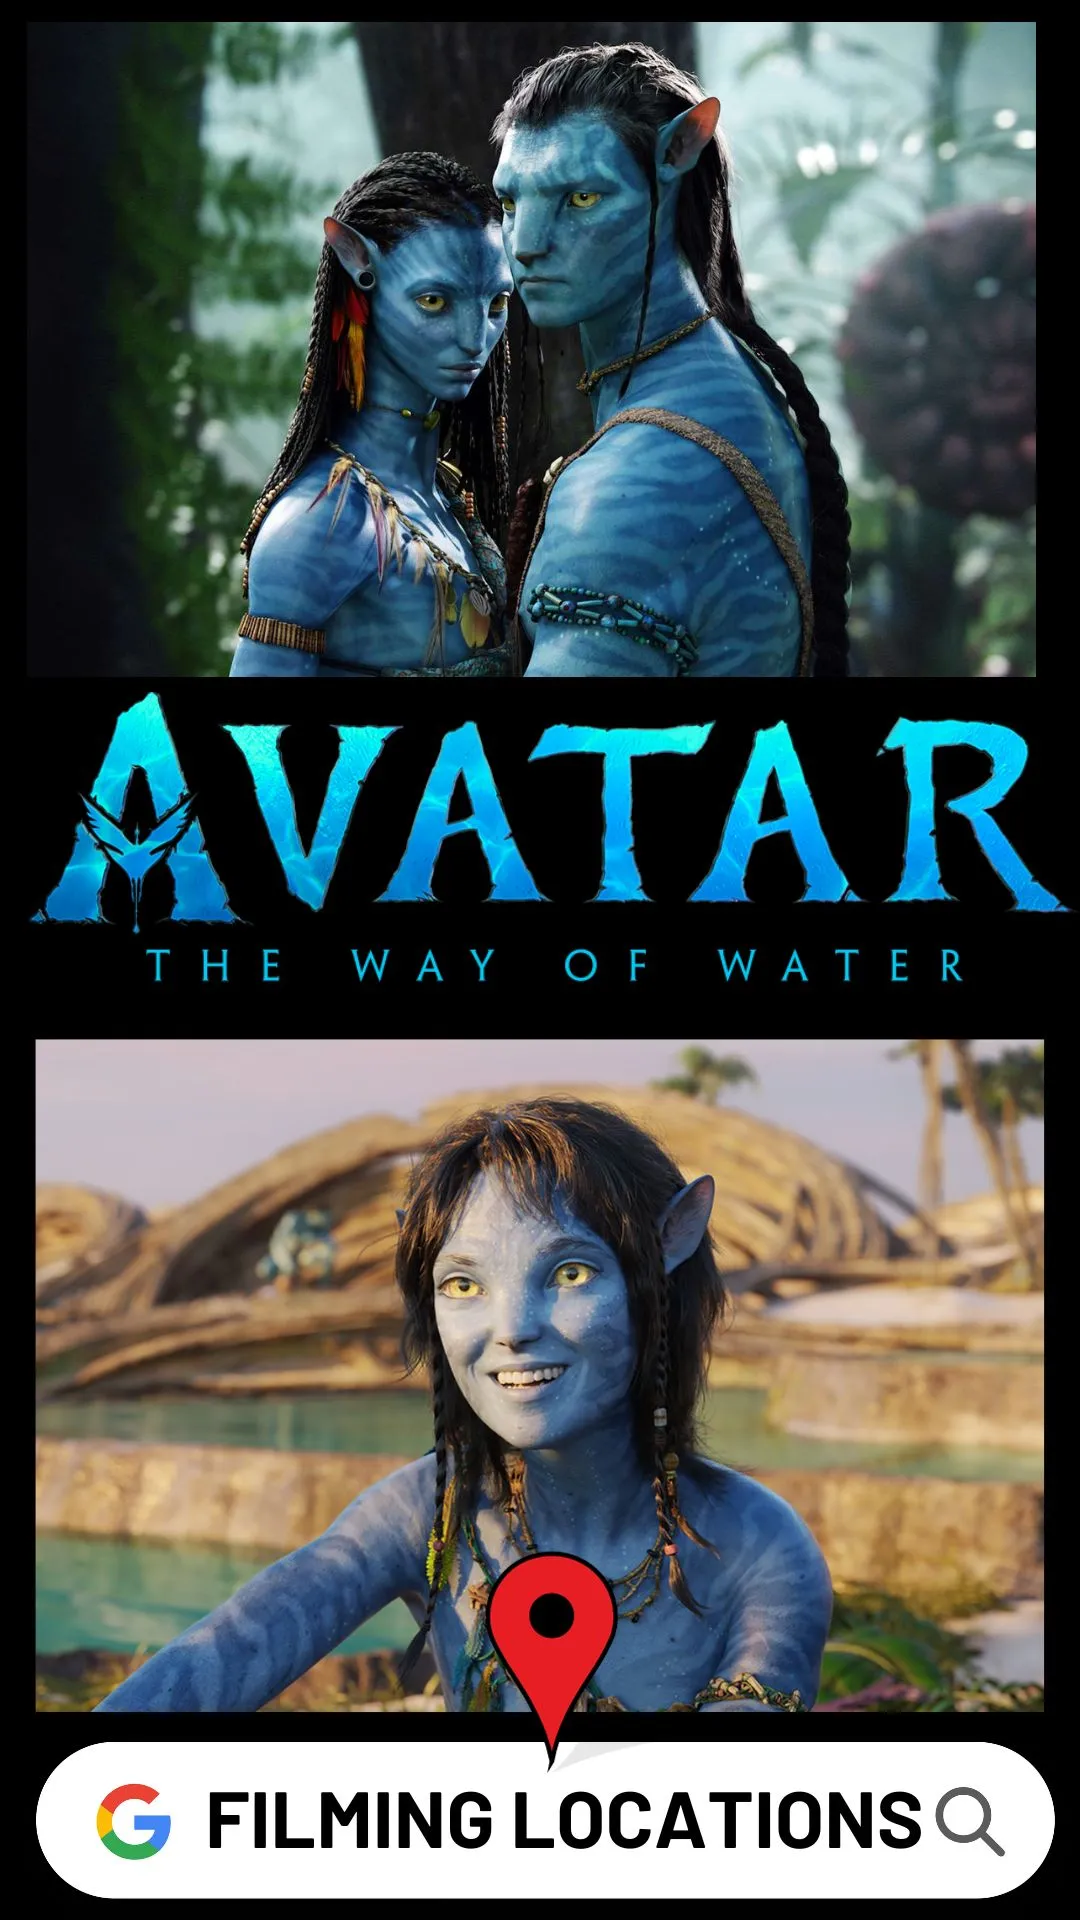 Avatar The Way of Water Filming Locations